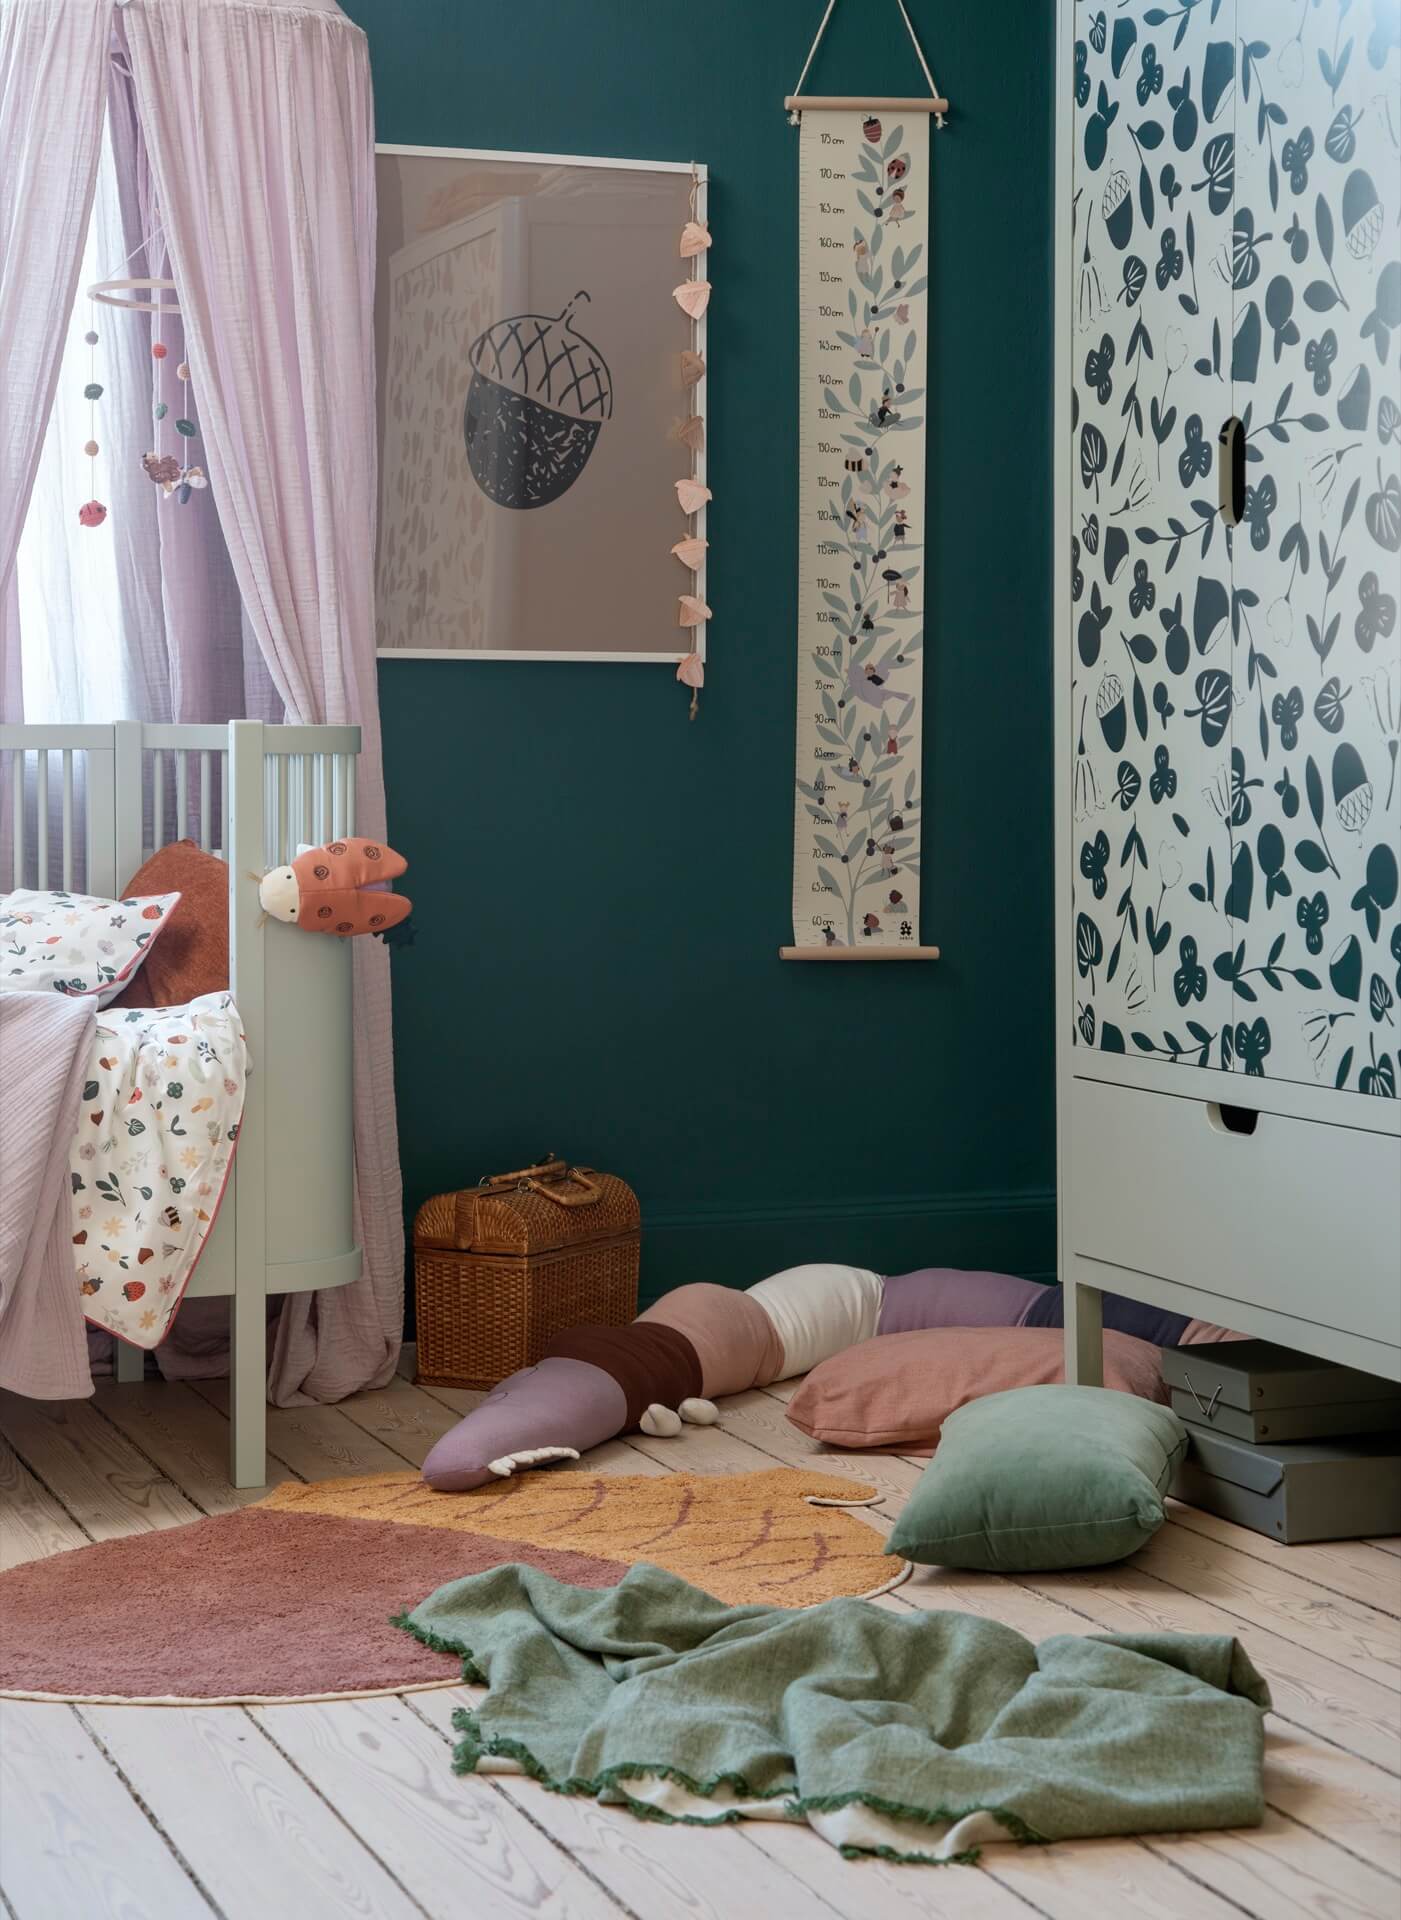 Inspiration chambre enfant (2 ans) - With a love like that - Blog lifestyle  & LOVE